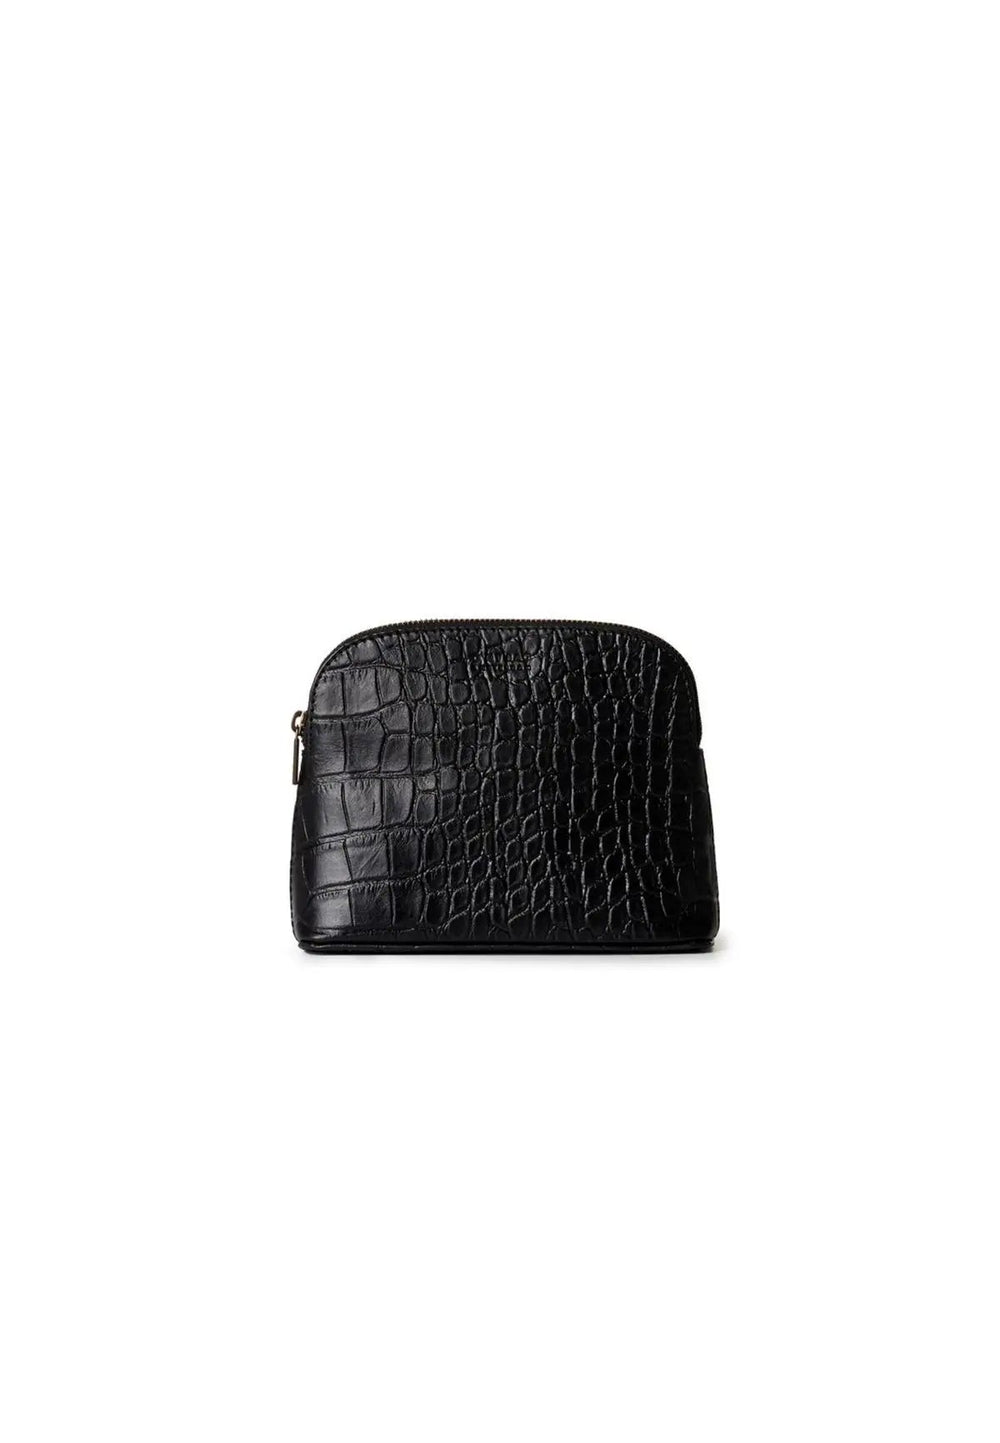 COSMETIC POUCH BLACK CROCO CLASSIC LEATHER - Moeon